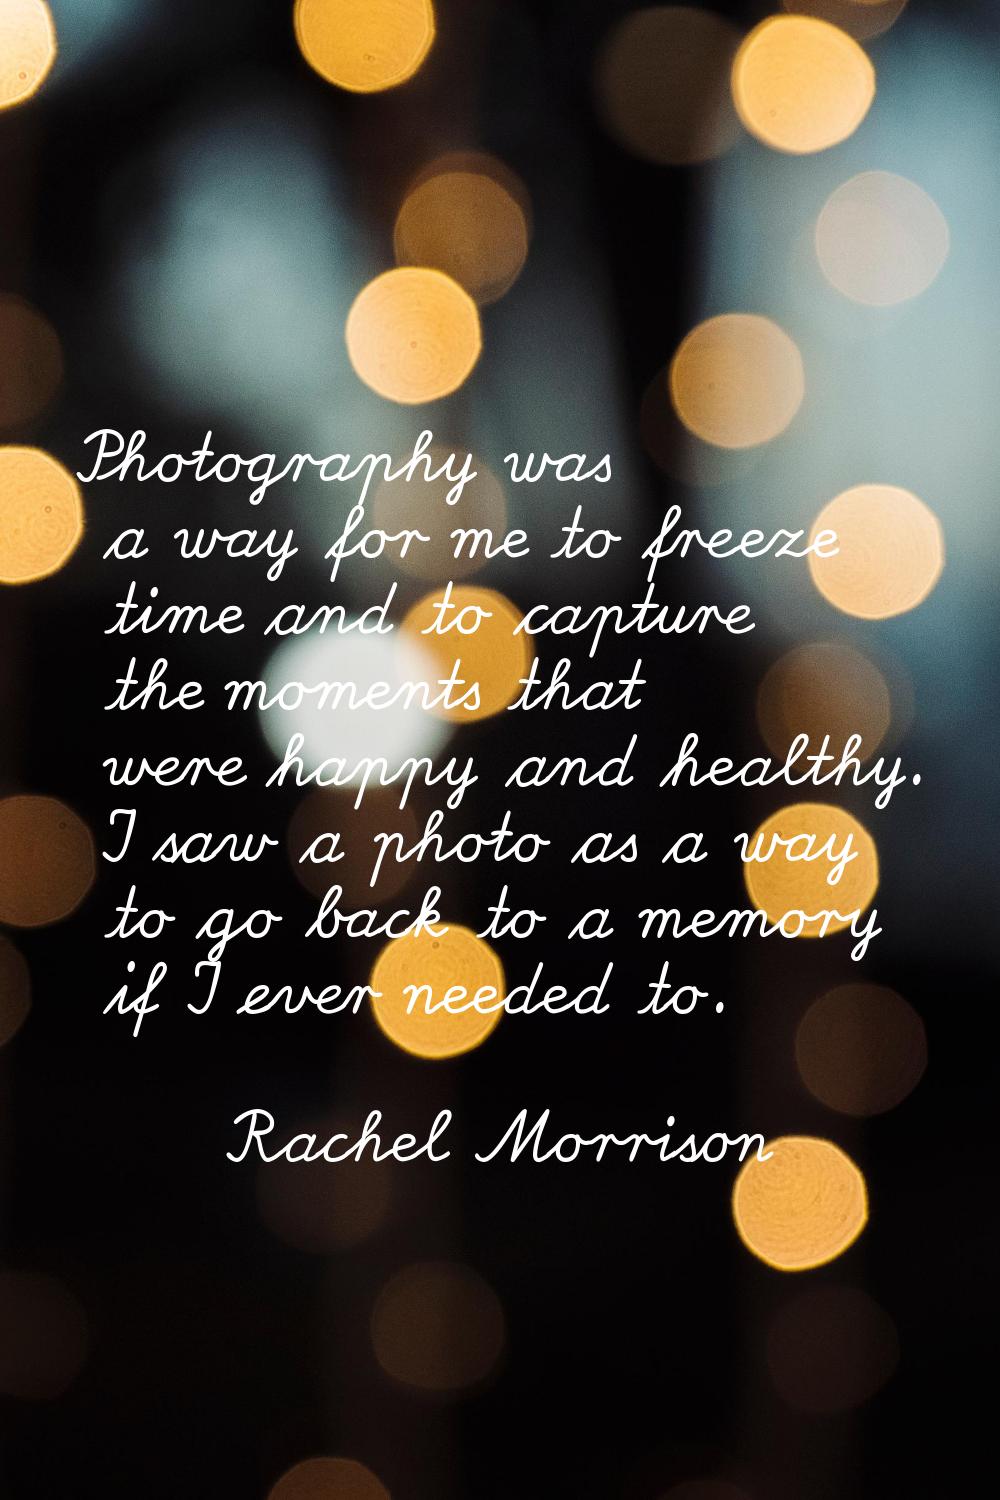 Photography was a way for me to freeze time and to capture the moments that were happy and healthy.